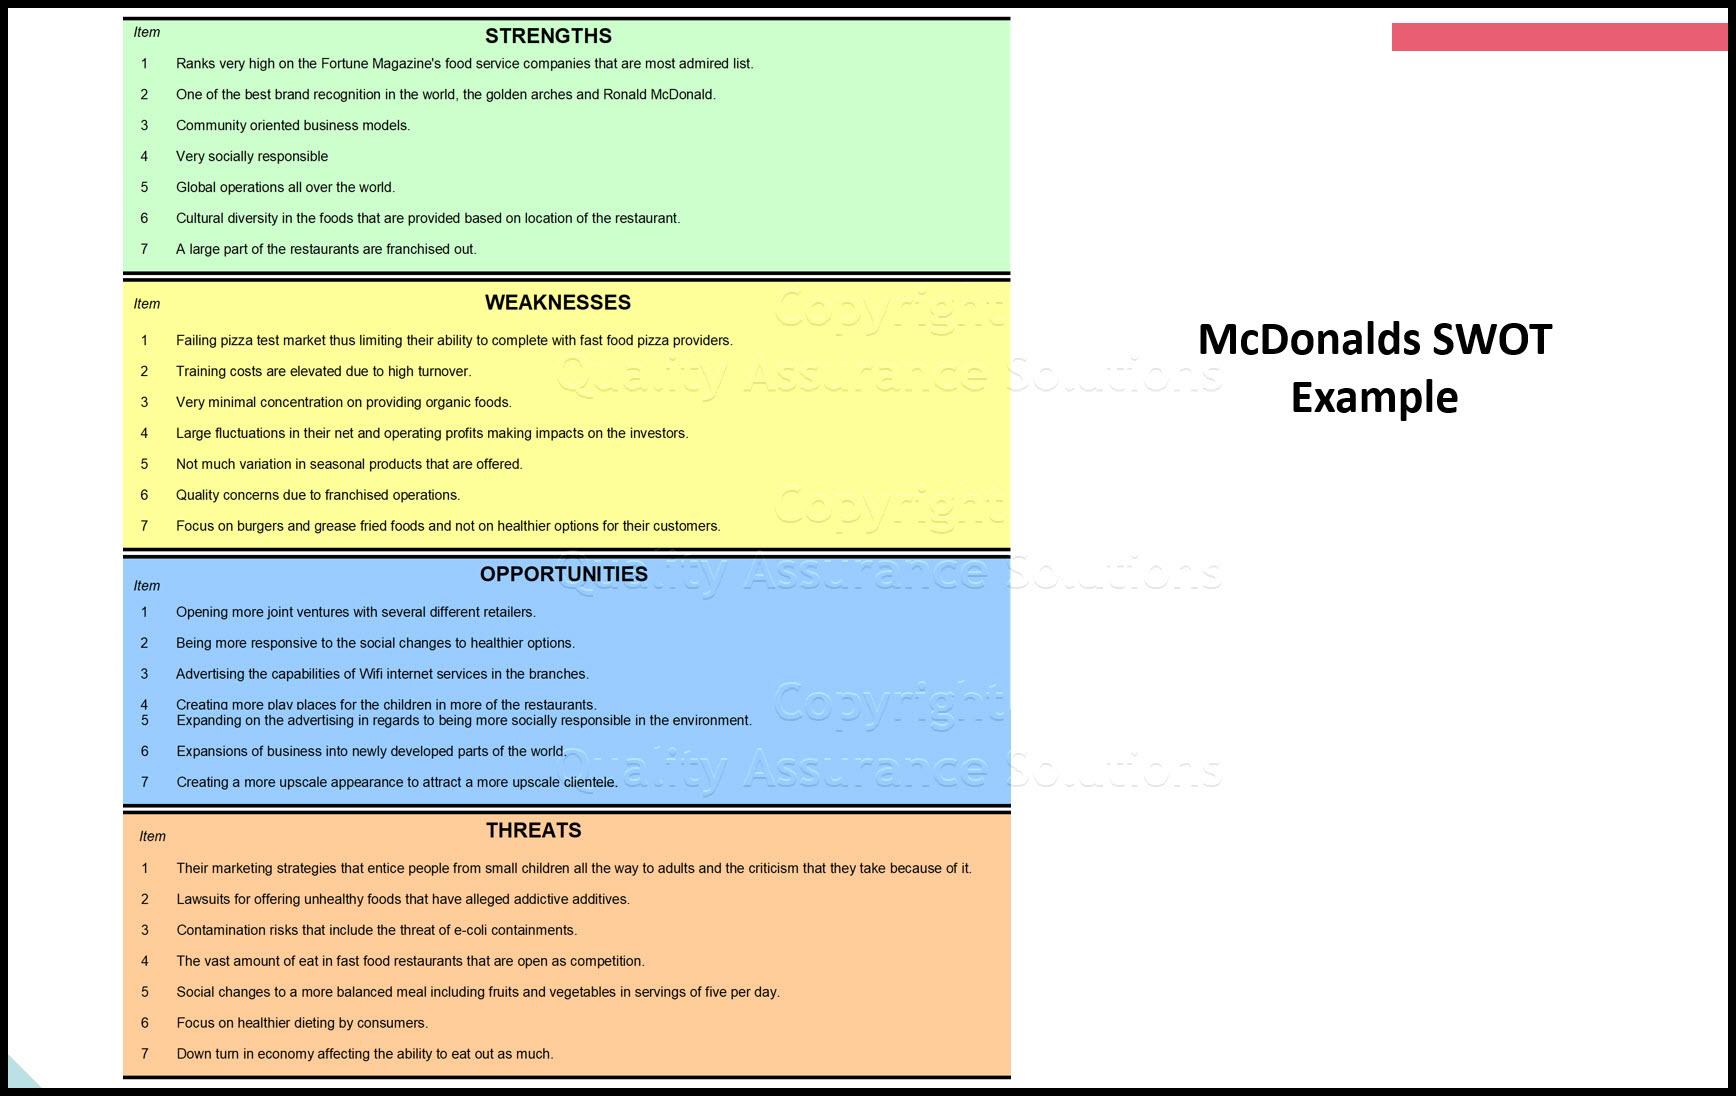 Review this McDonalds SWOT Analysis.